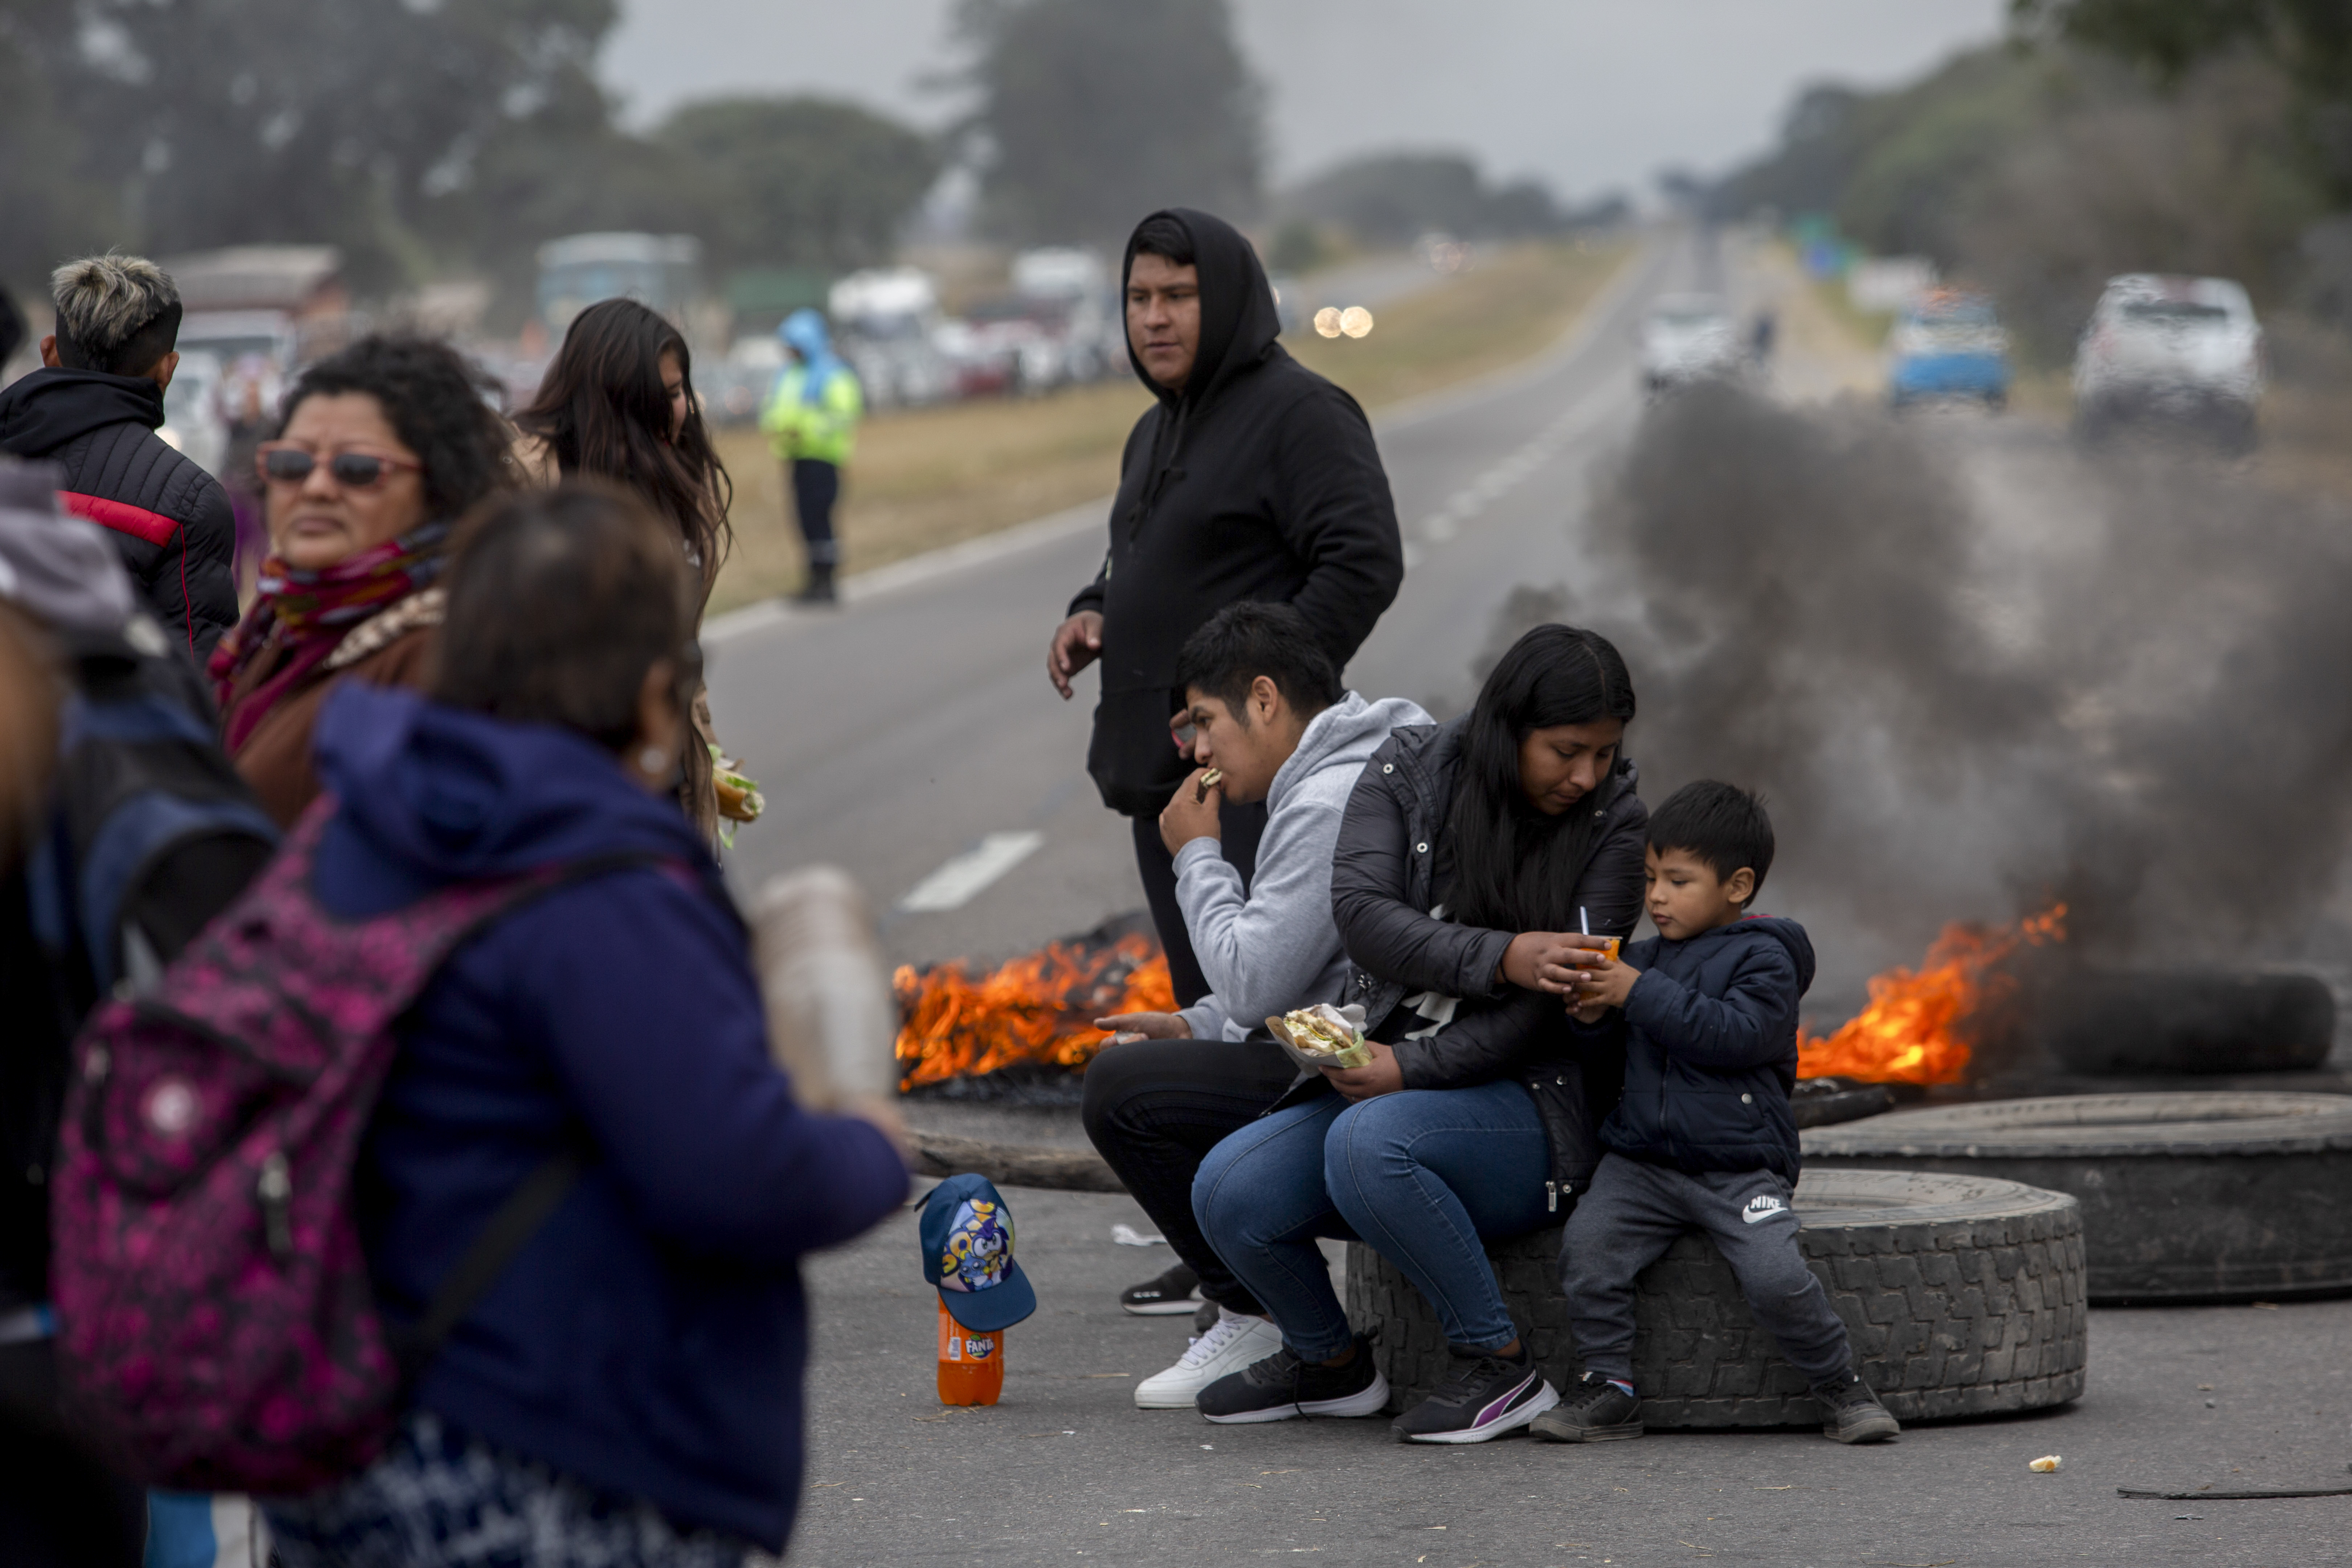 Demonstrators protest against the blockade of a highway on the outskirts of San Salvador de Jujuy, Argentina, Tuesday, June 20, 2023. Demonstrations erupted in the province of Jujuy in reaction to a recent reform of the provincial constitution criticized for its restrictions on social protest.  (AP Photo/Javier Corbalan)